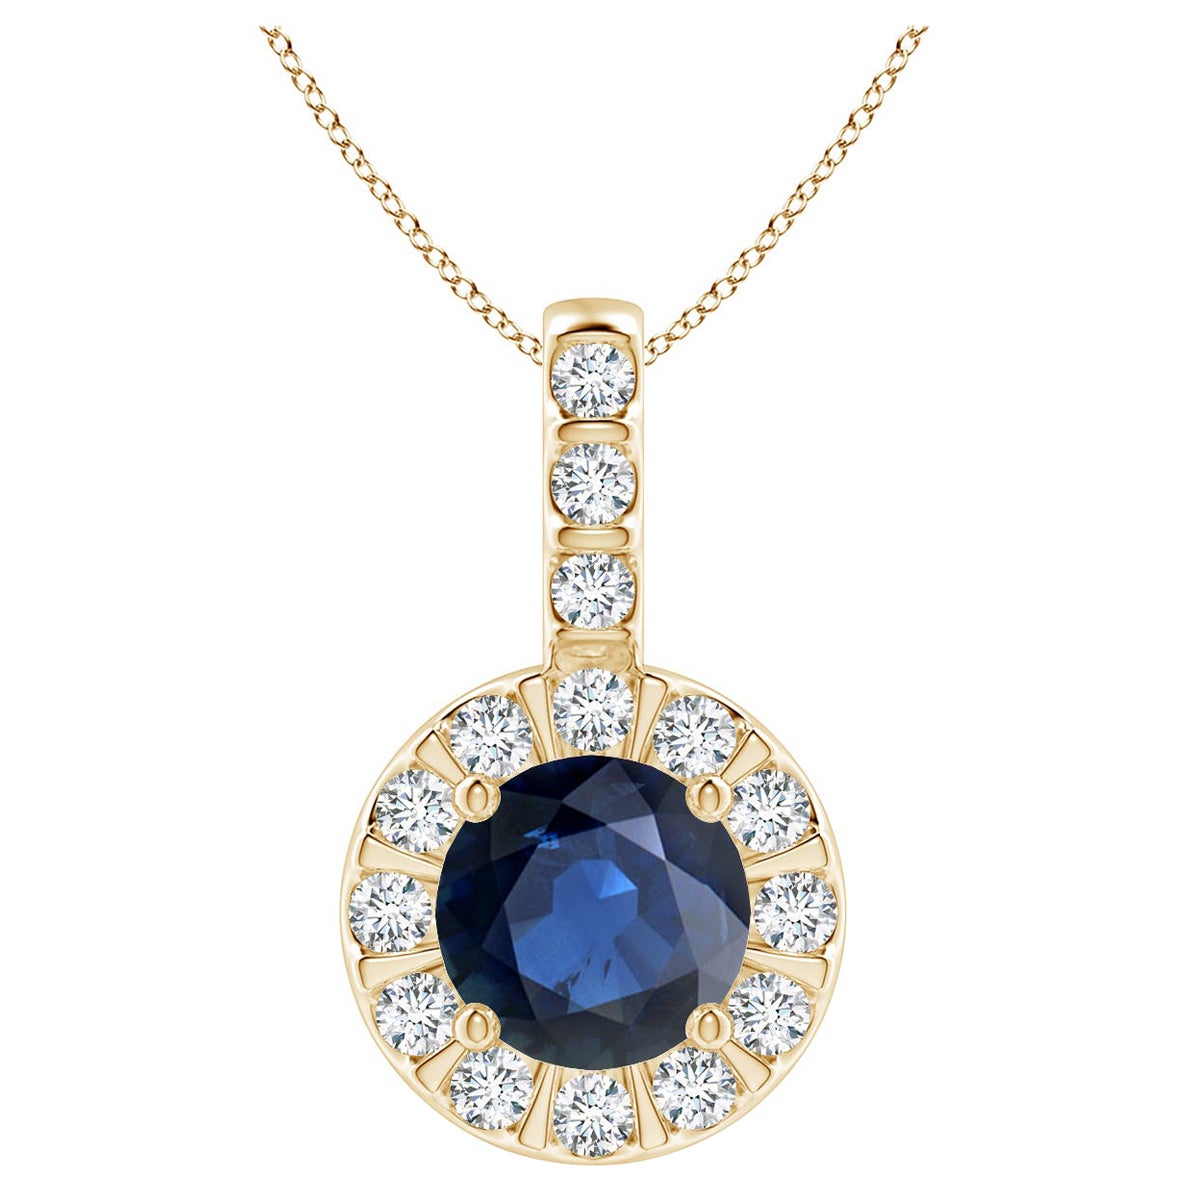 ANGARA Natural 1ct Blue Sapphire Pendant with Diamond Halo in 14K Yellow Gold